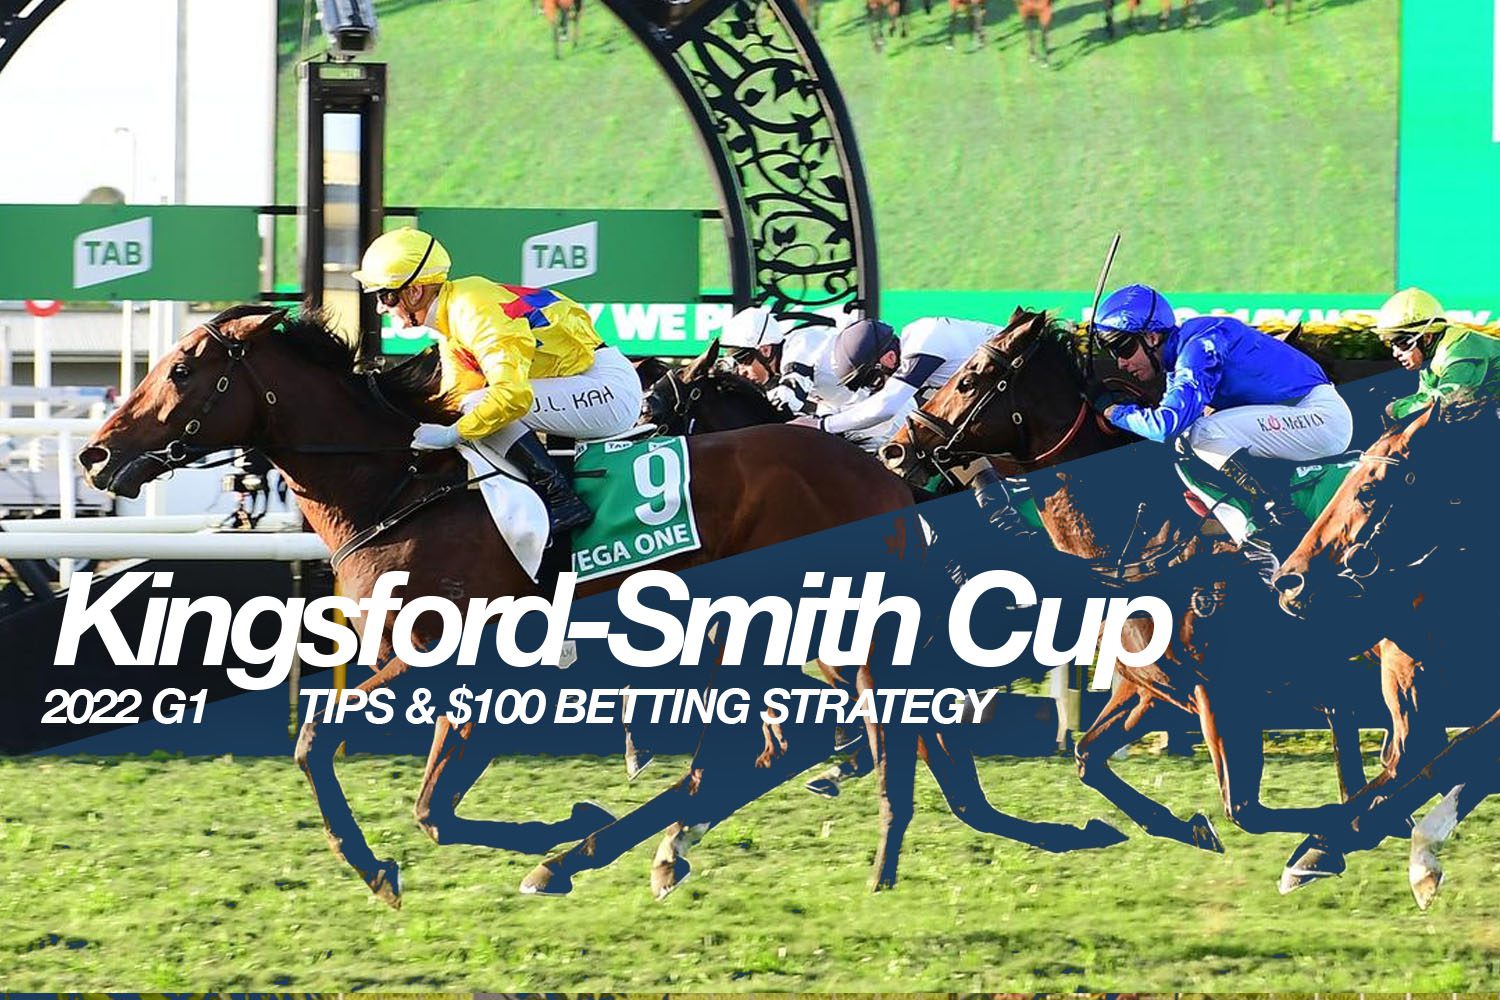 Kingsford Smith Cup betting tips